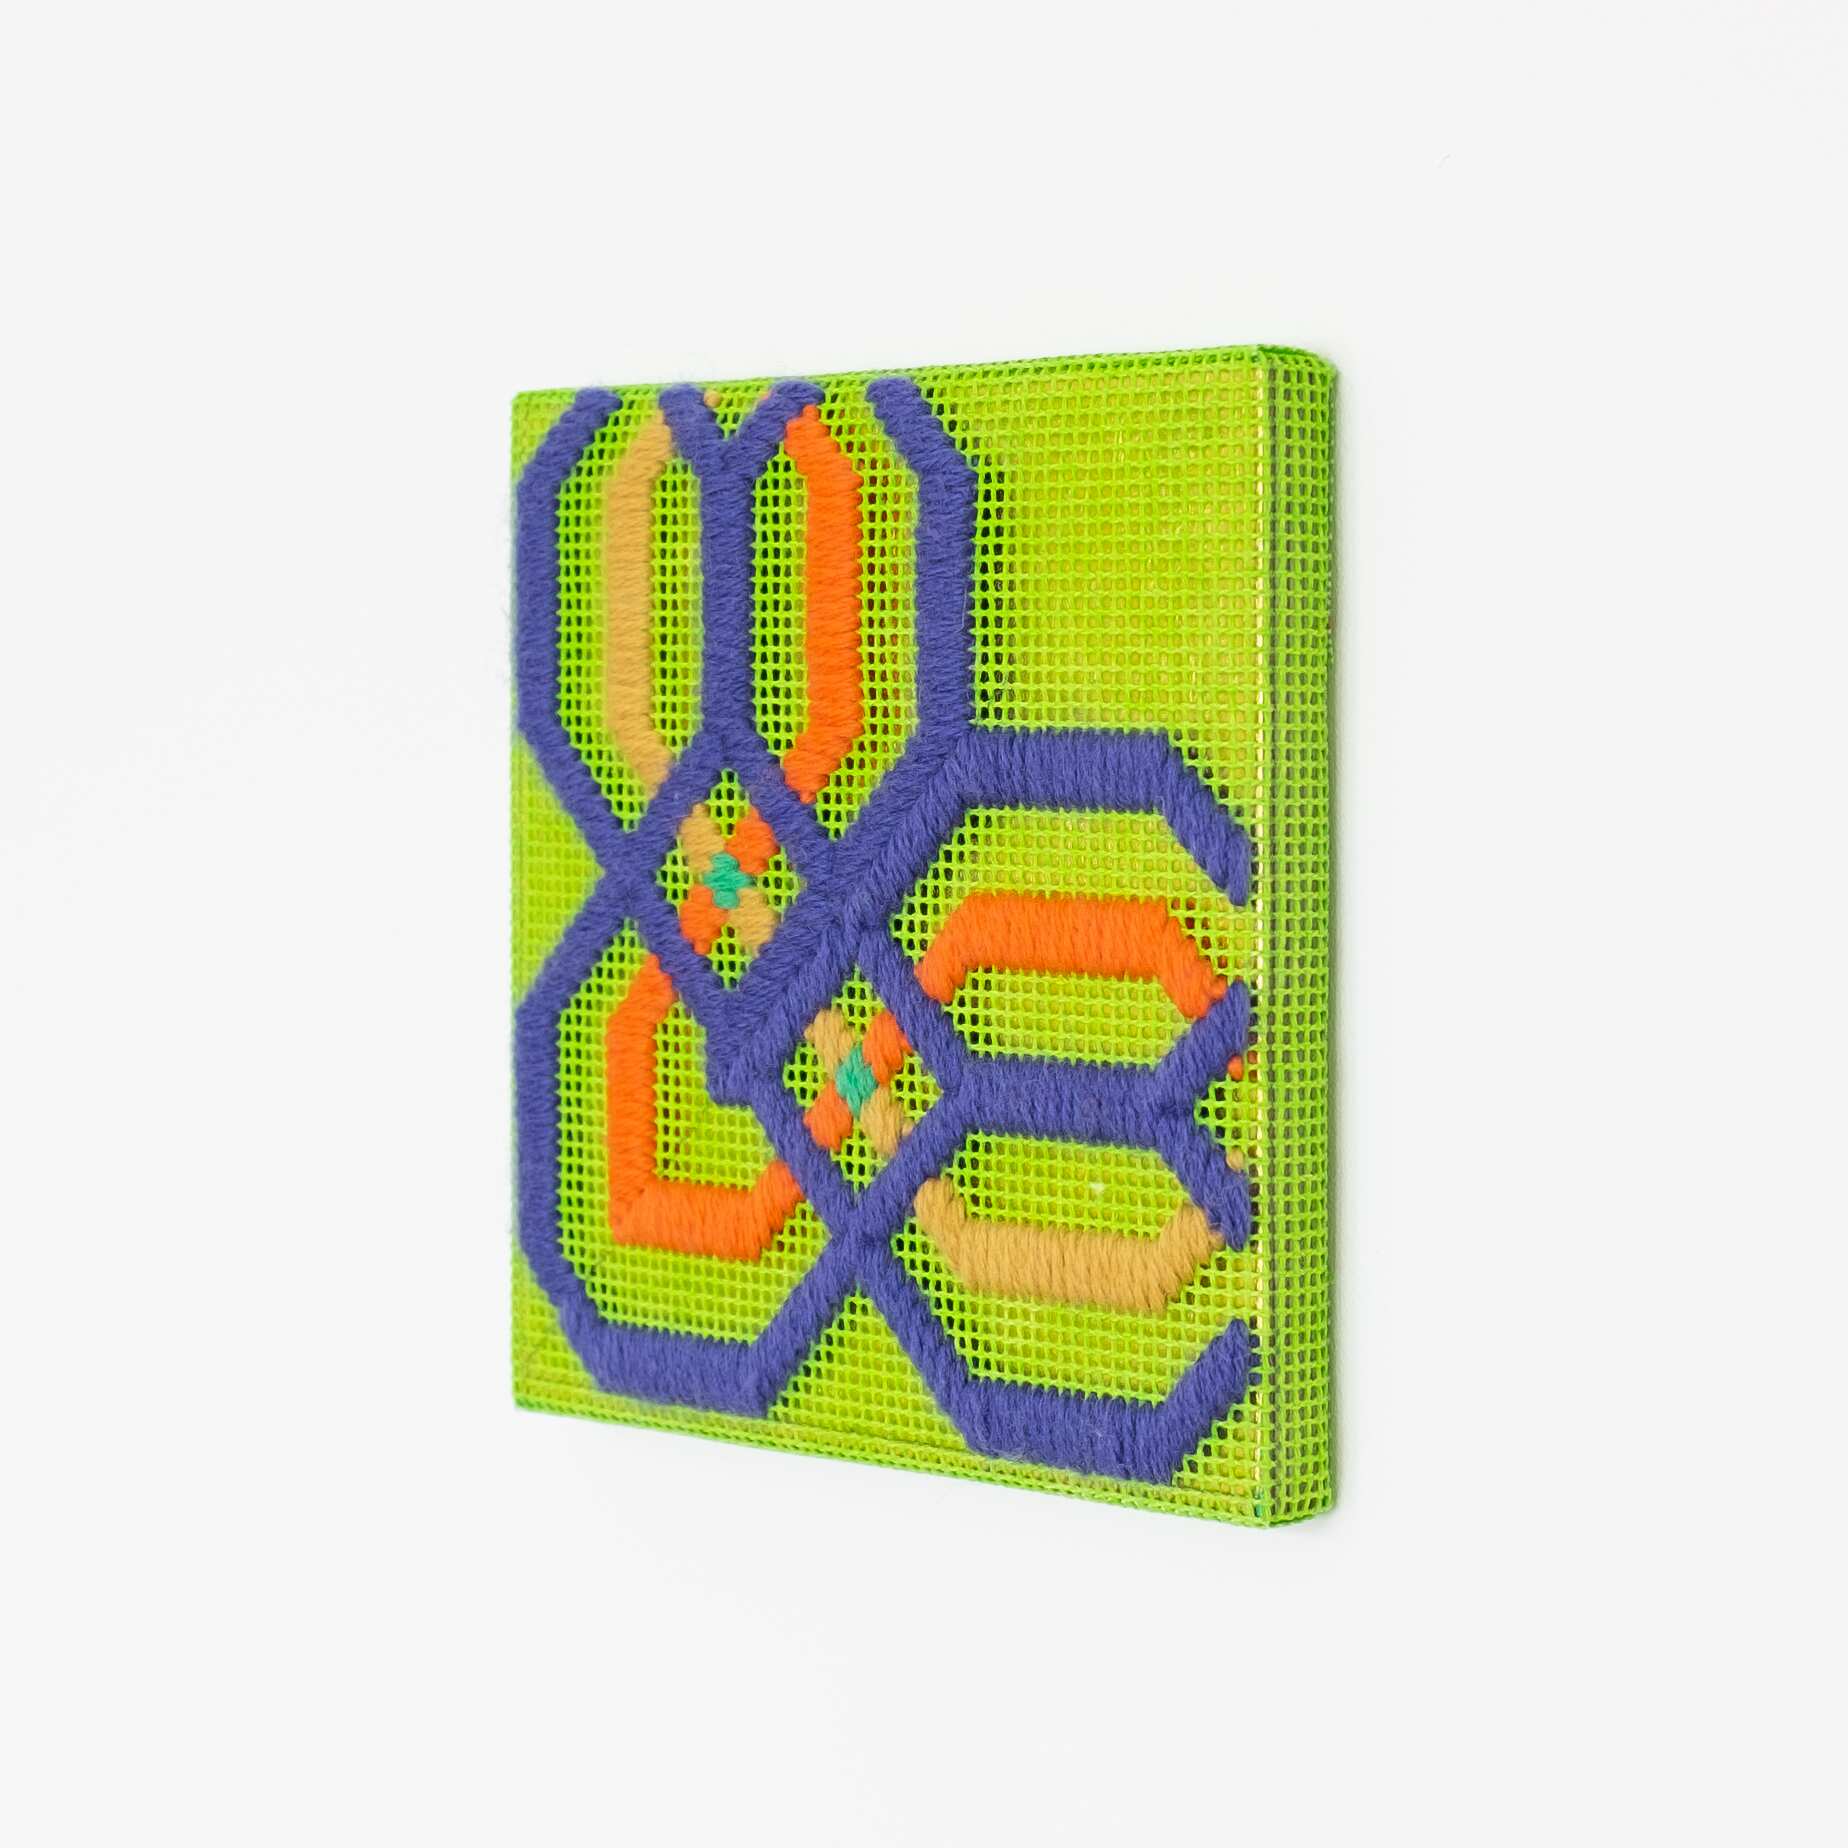 Border fragment [purple-orange-yellow on green], Hand-embroidered wool thread and acrylic paint on canvas over gilded panel, 2021